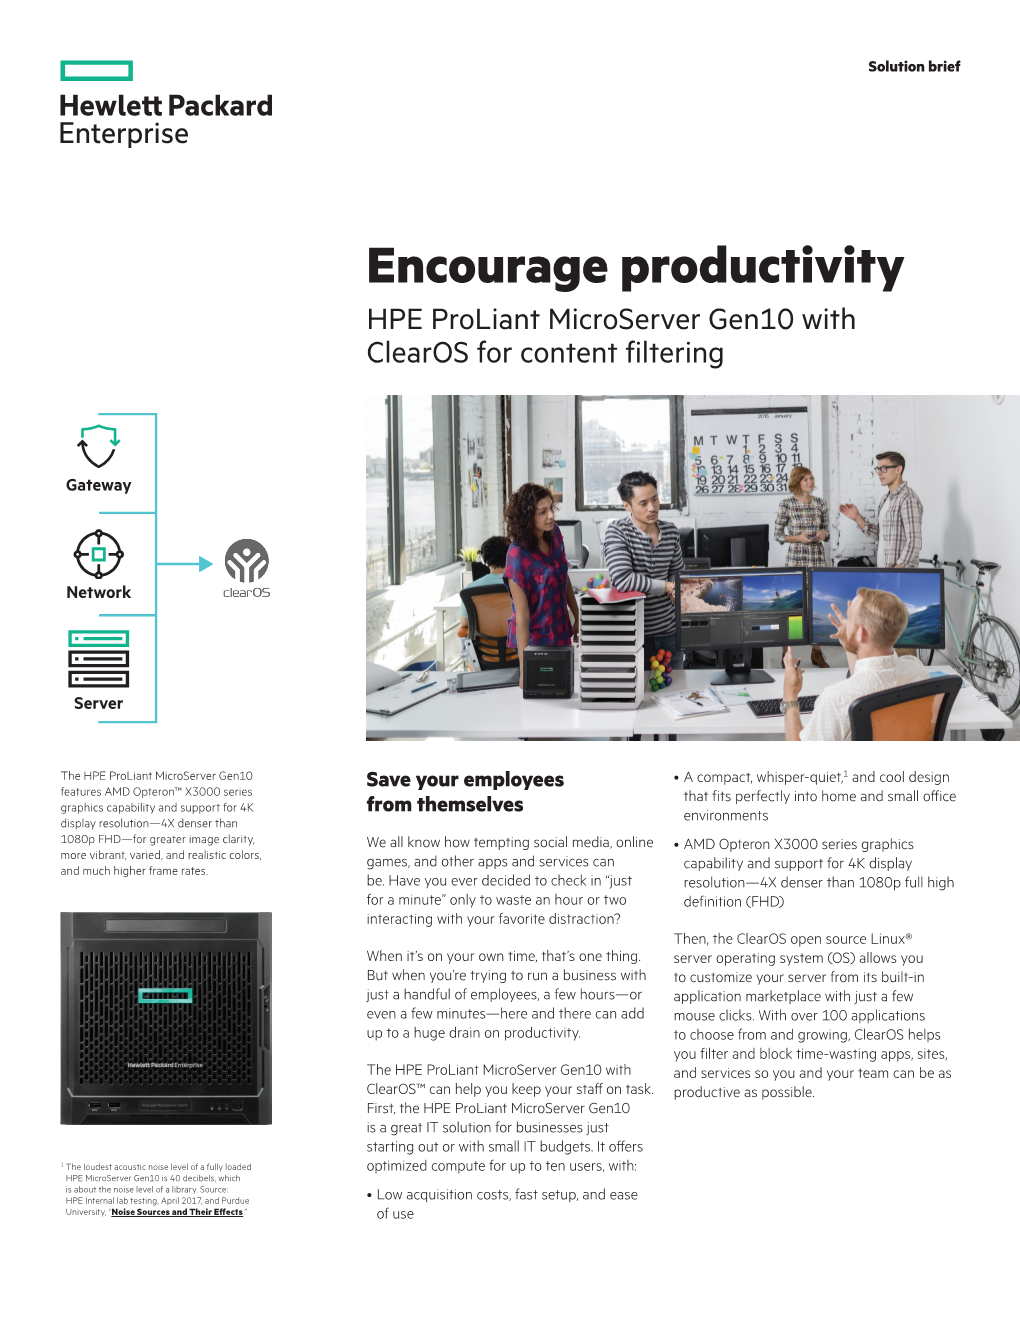 Encourage Productivity Through HPE Proliant Microserver Gen10 with Clearos for Content Filtering Solution Brief